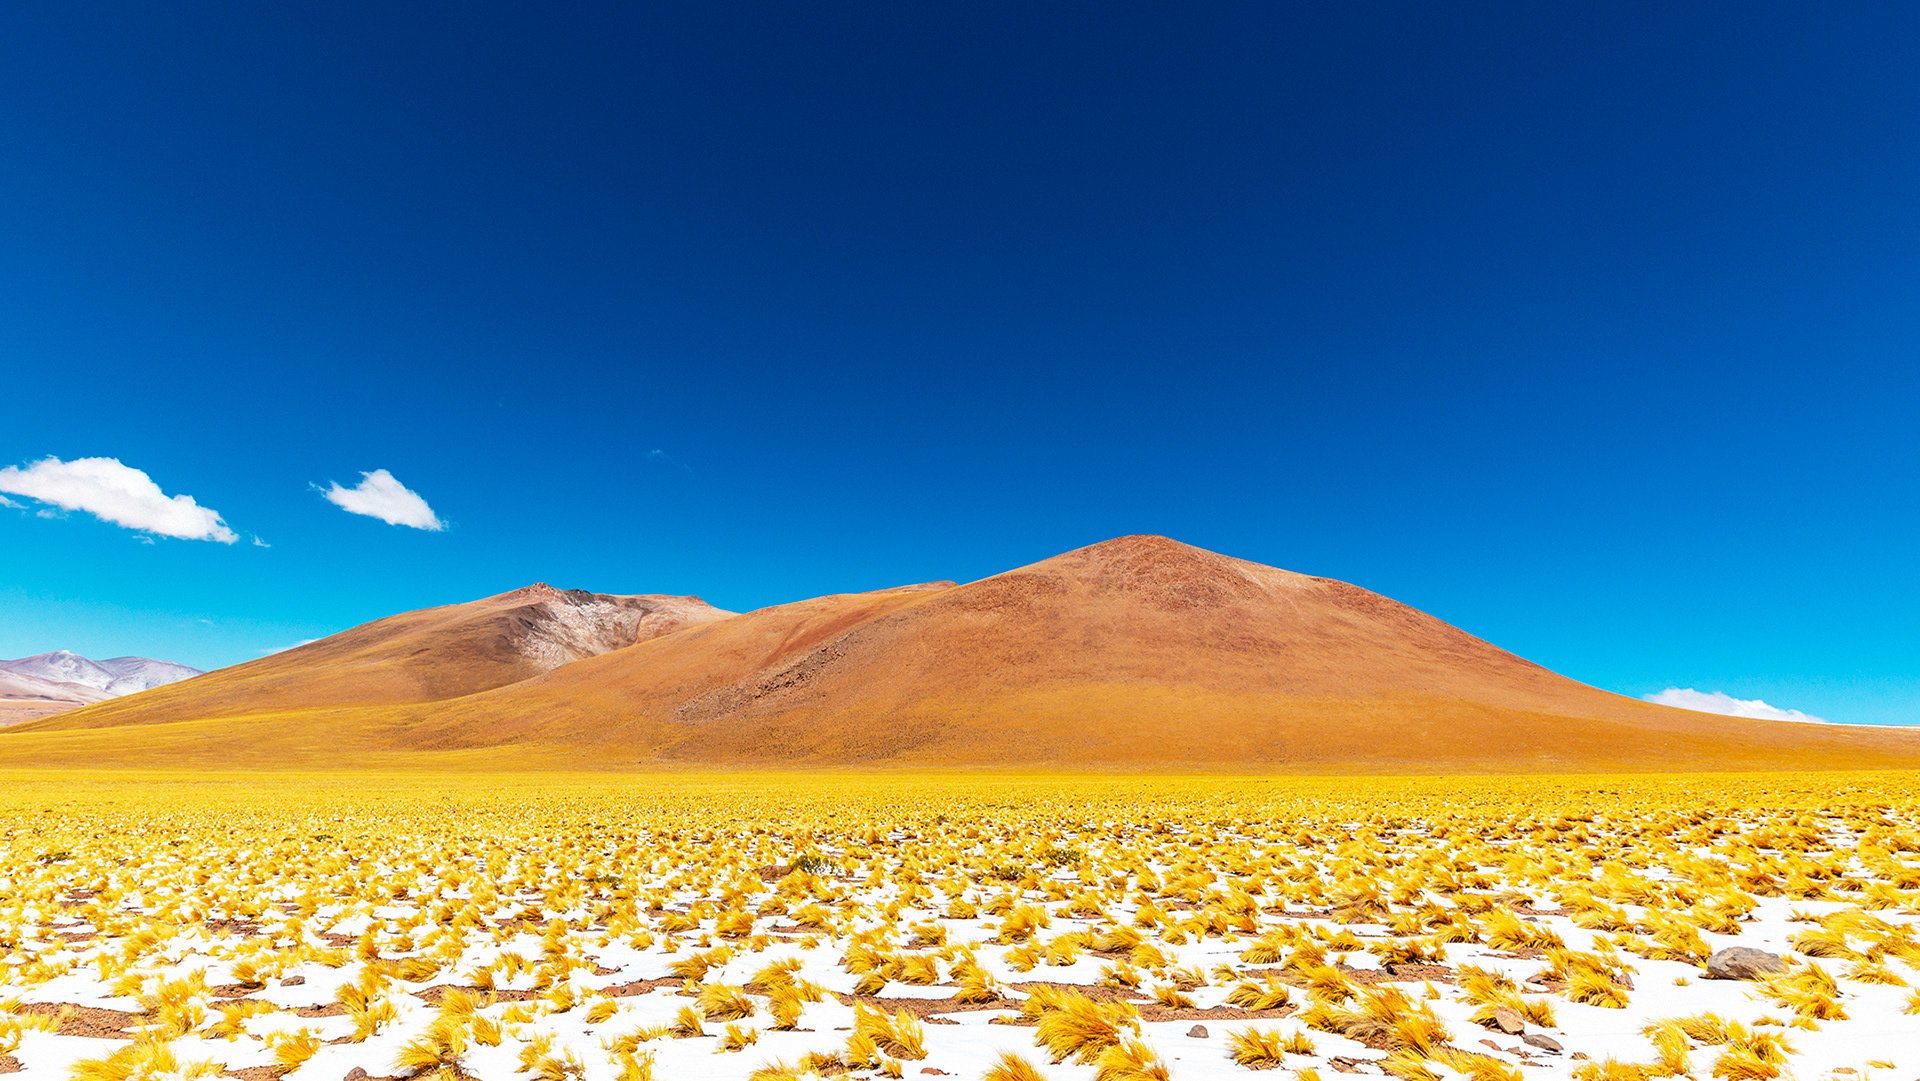 Felipe Ballin Shares the Colorful Spectacle of the Atacama Landscapes